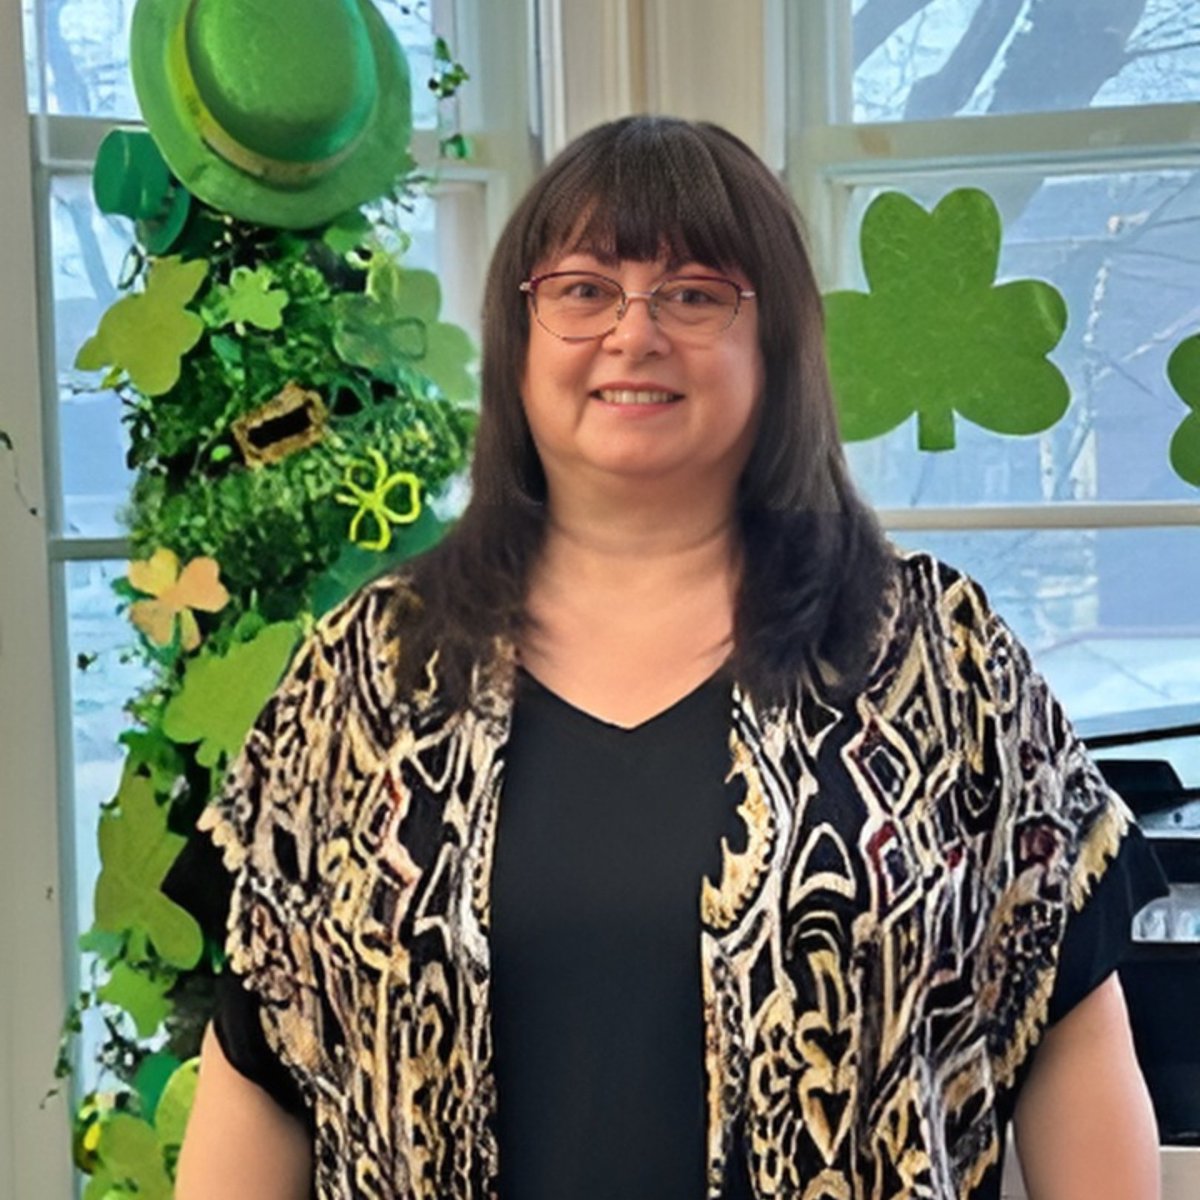 Meet Ivy! She has worked at Emmanuel House for over 20 years as a clinical social worker offering group + individual counseling to adults with mental health & addictions challenges. We are lucky to have her. #StellasCircle #HopeLivesHere #SocialWorkMonth